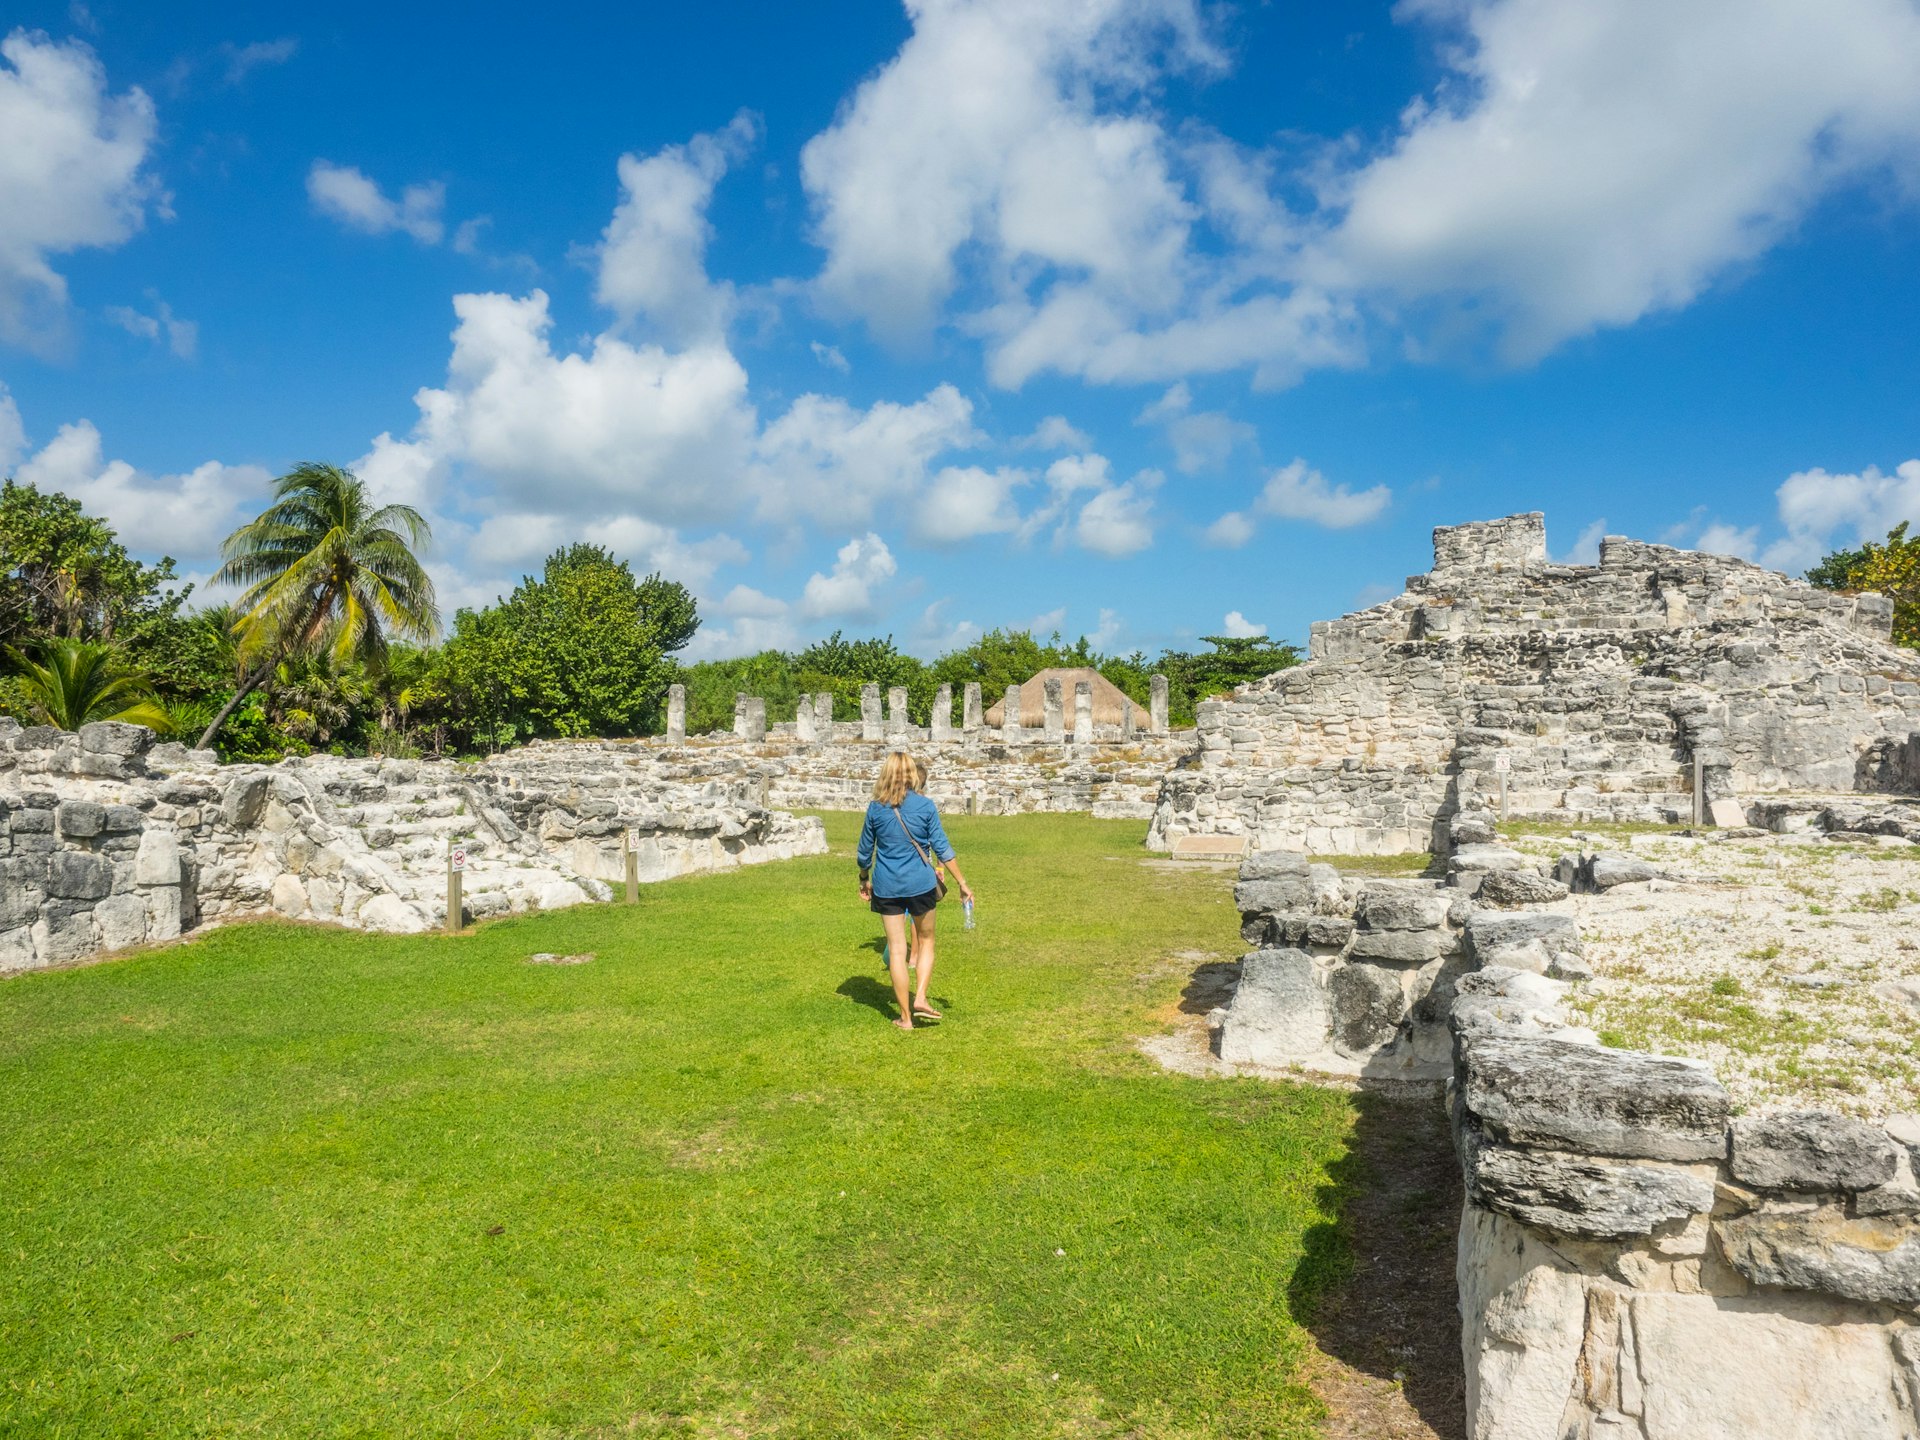 Visitors at the El Rey Archaeological site, located in the Hotel Zone of Cancun